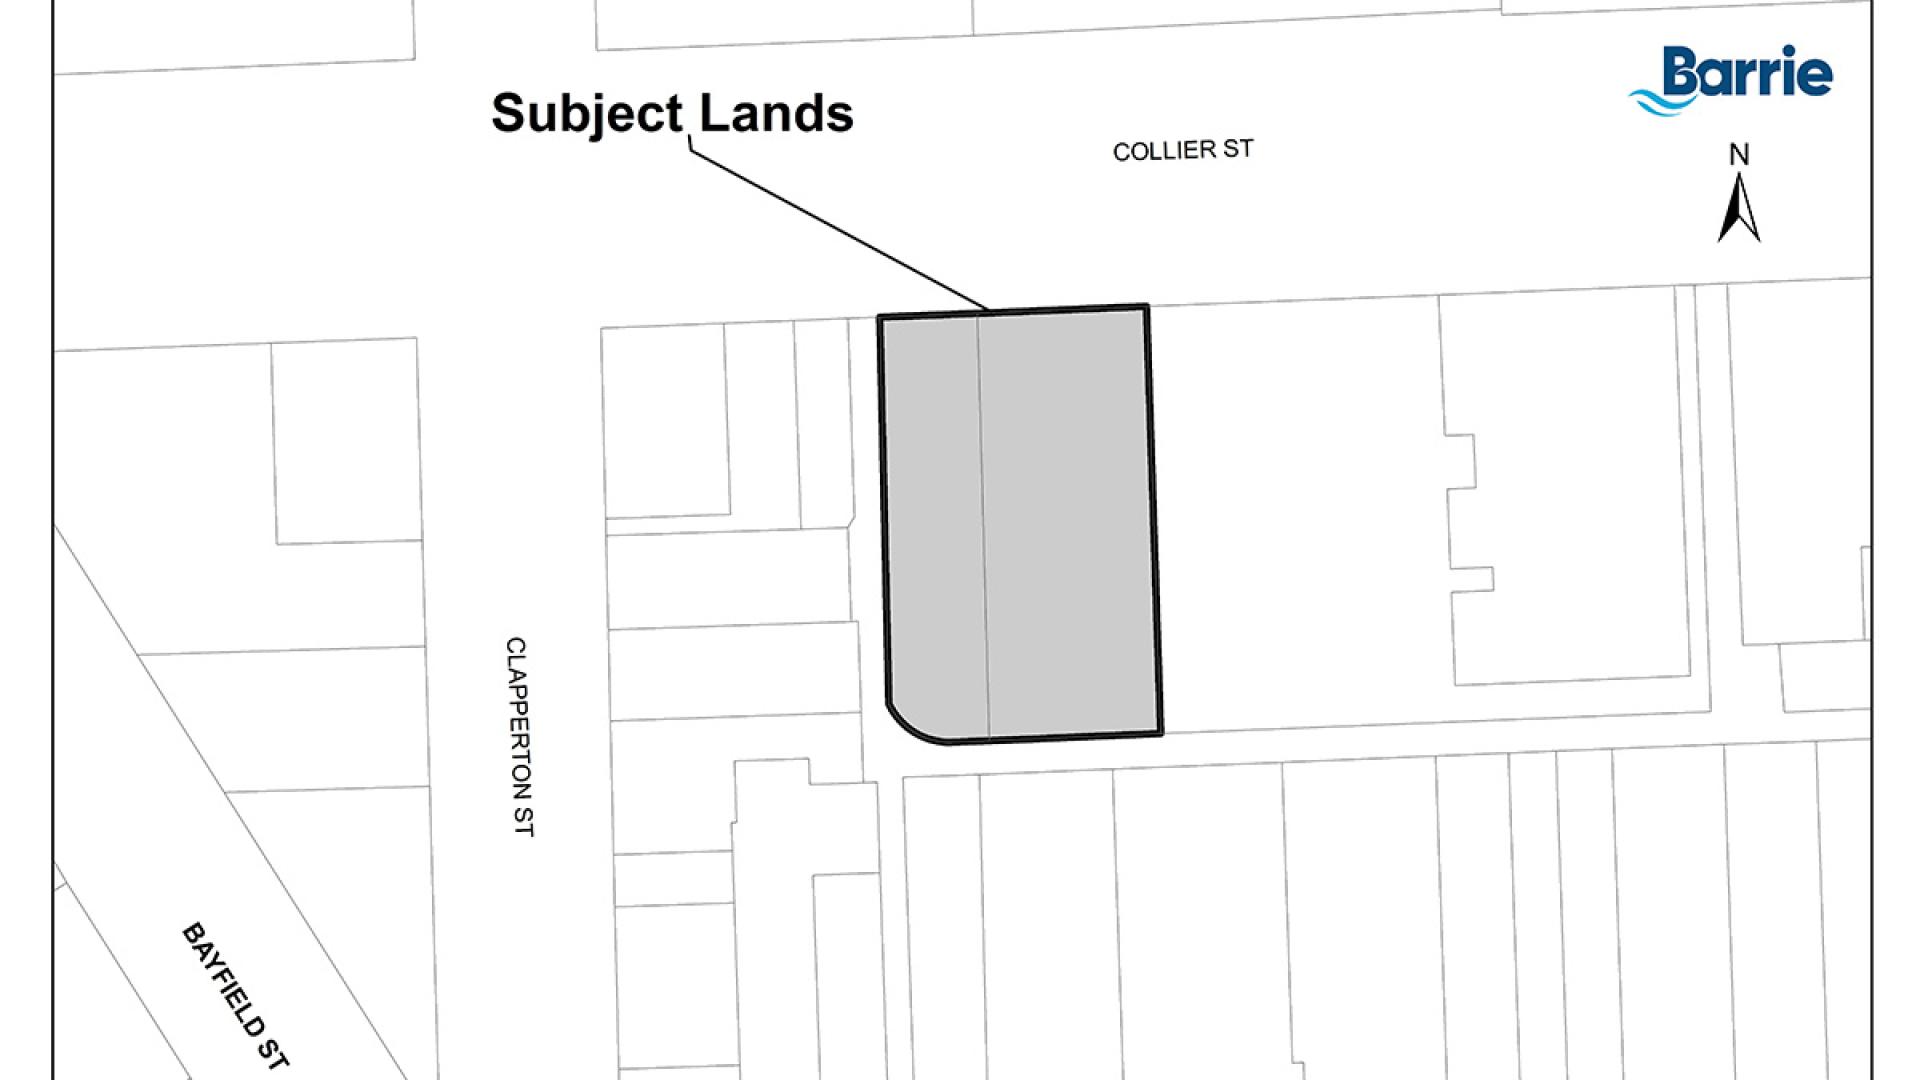 Map outlining the subject lands for a proposed development at 21 and 23 Collier Street